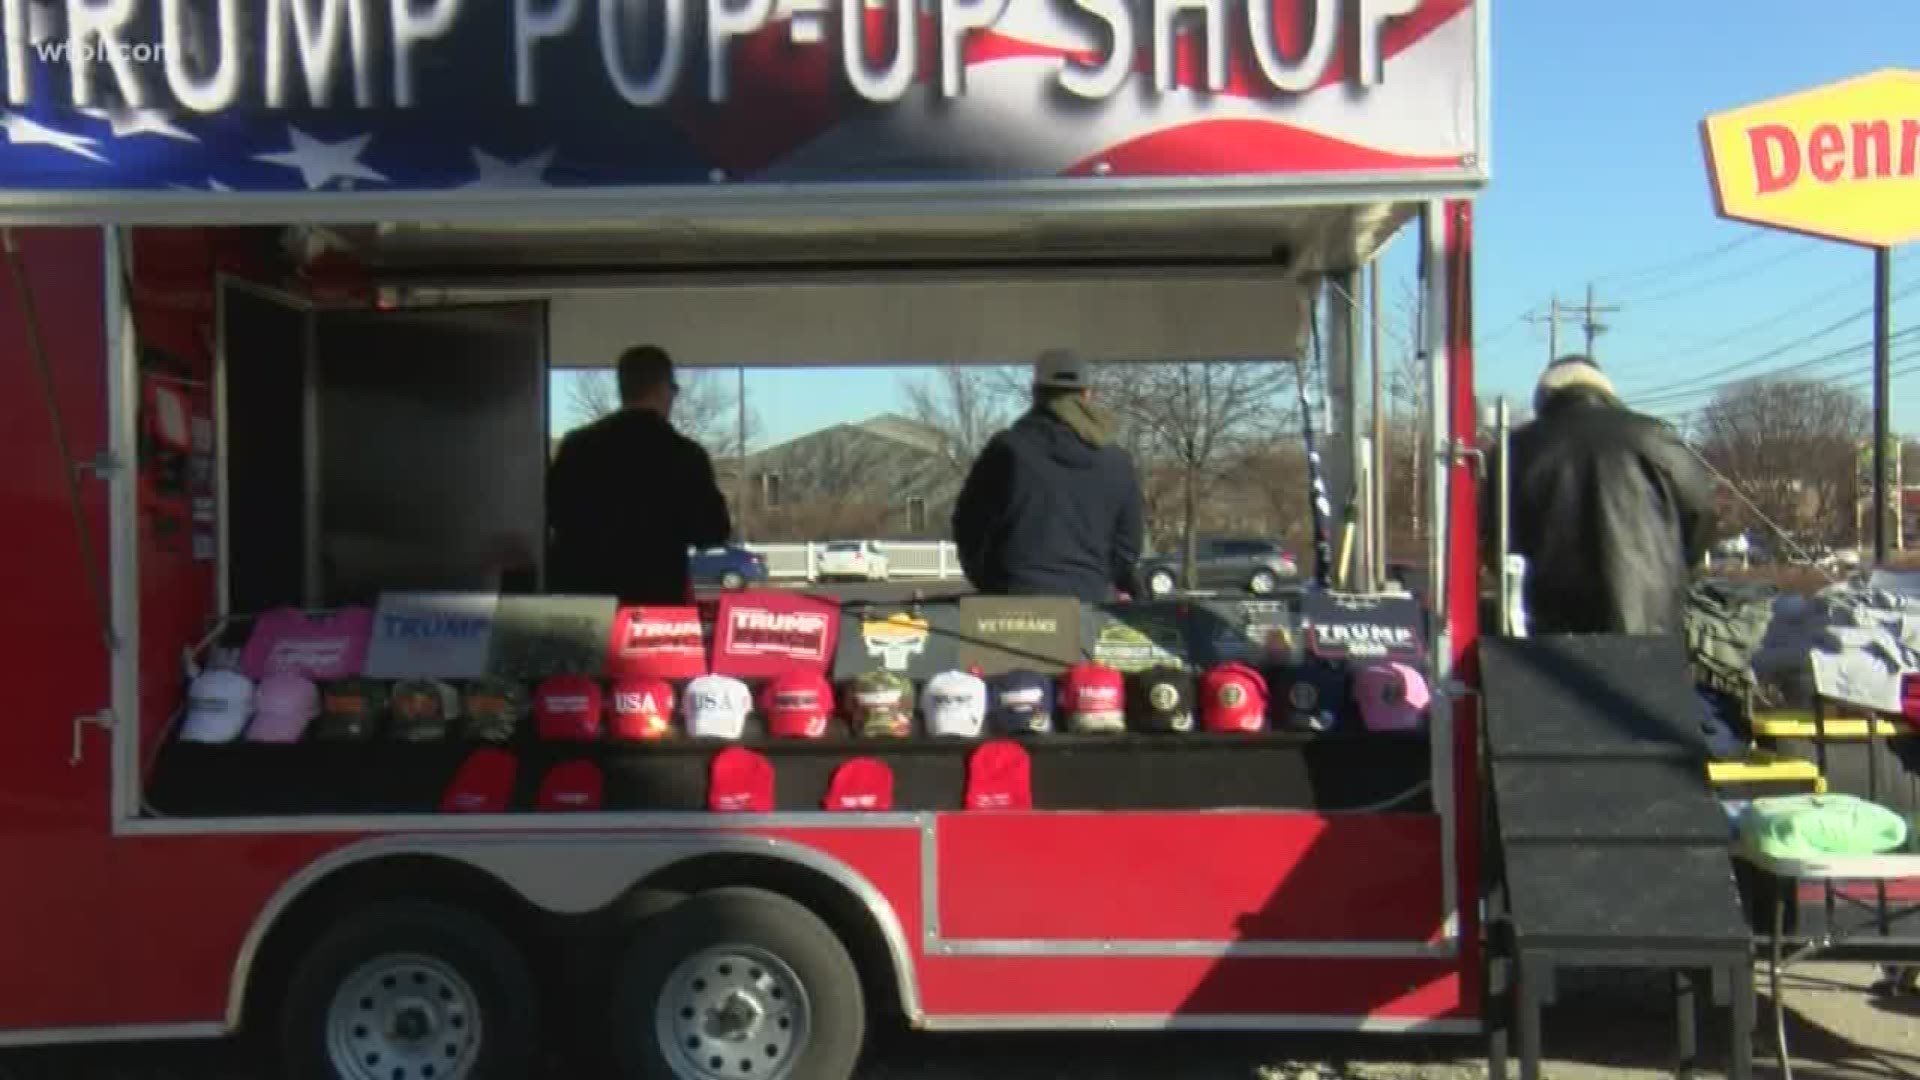 'Trump Pop-Up Shop' has arrived in Toledo. The business owner travels the nation ahead of the President's campaign rallies selling hats, shirts and buttons.